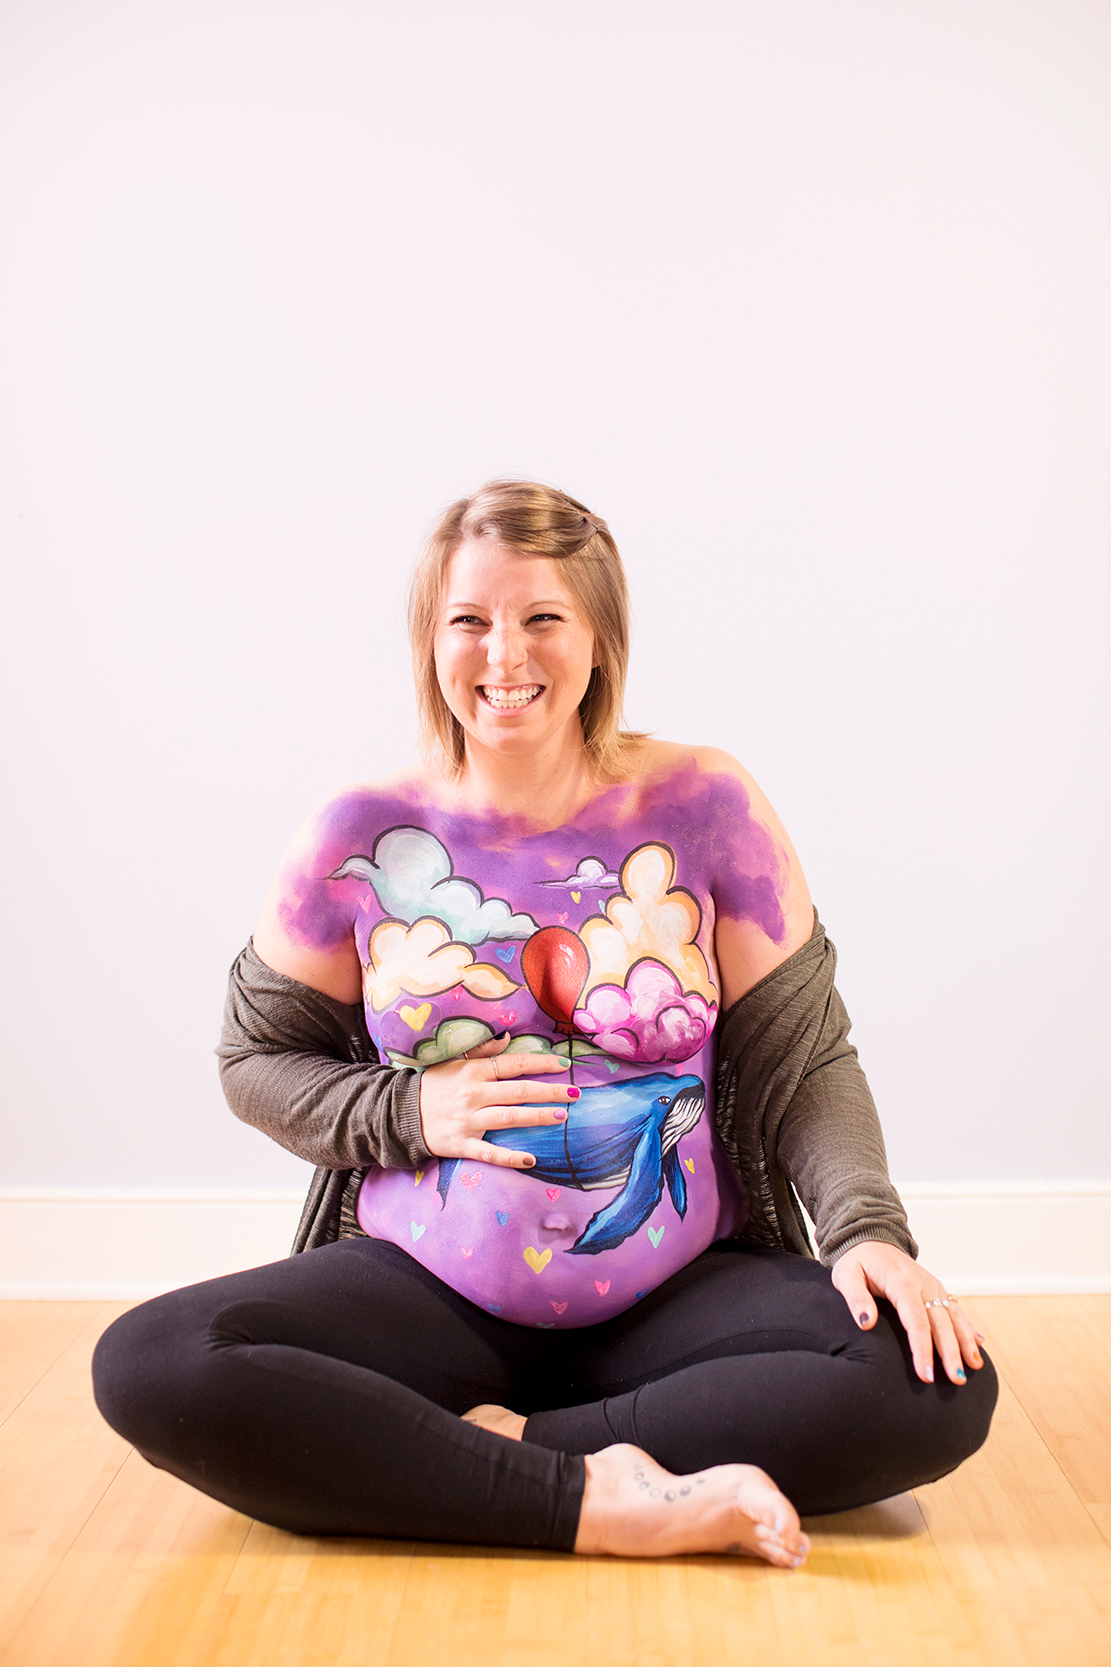 Body Painted Pregnant Belly Maternity Photo Shoot | J&D Studio 20/20